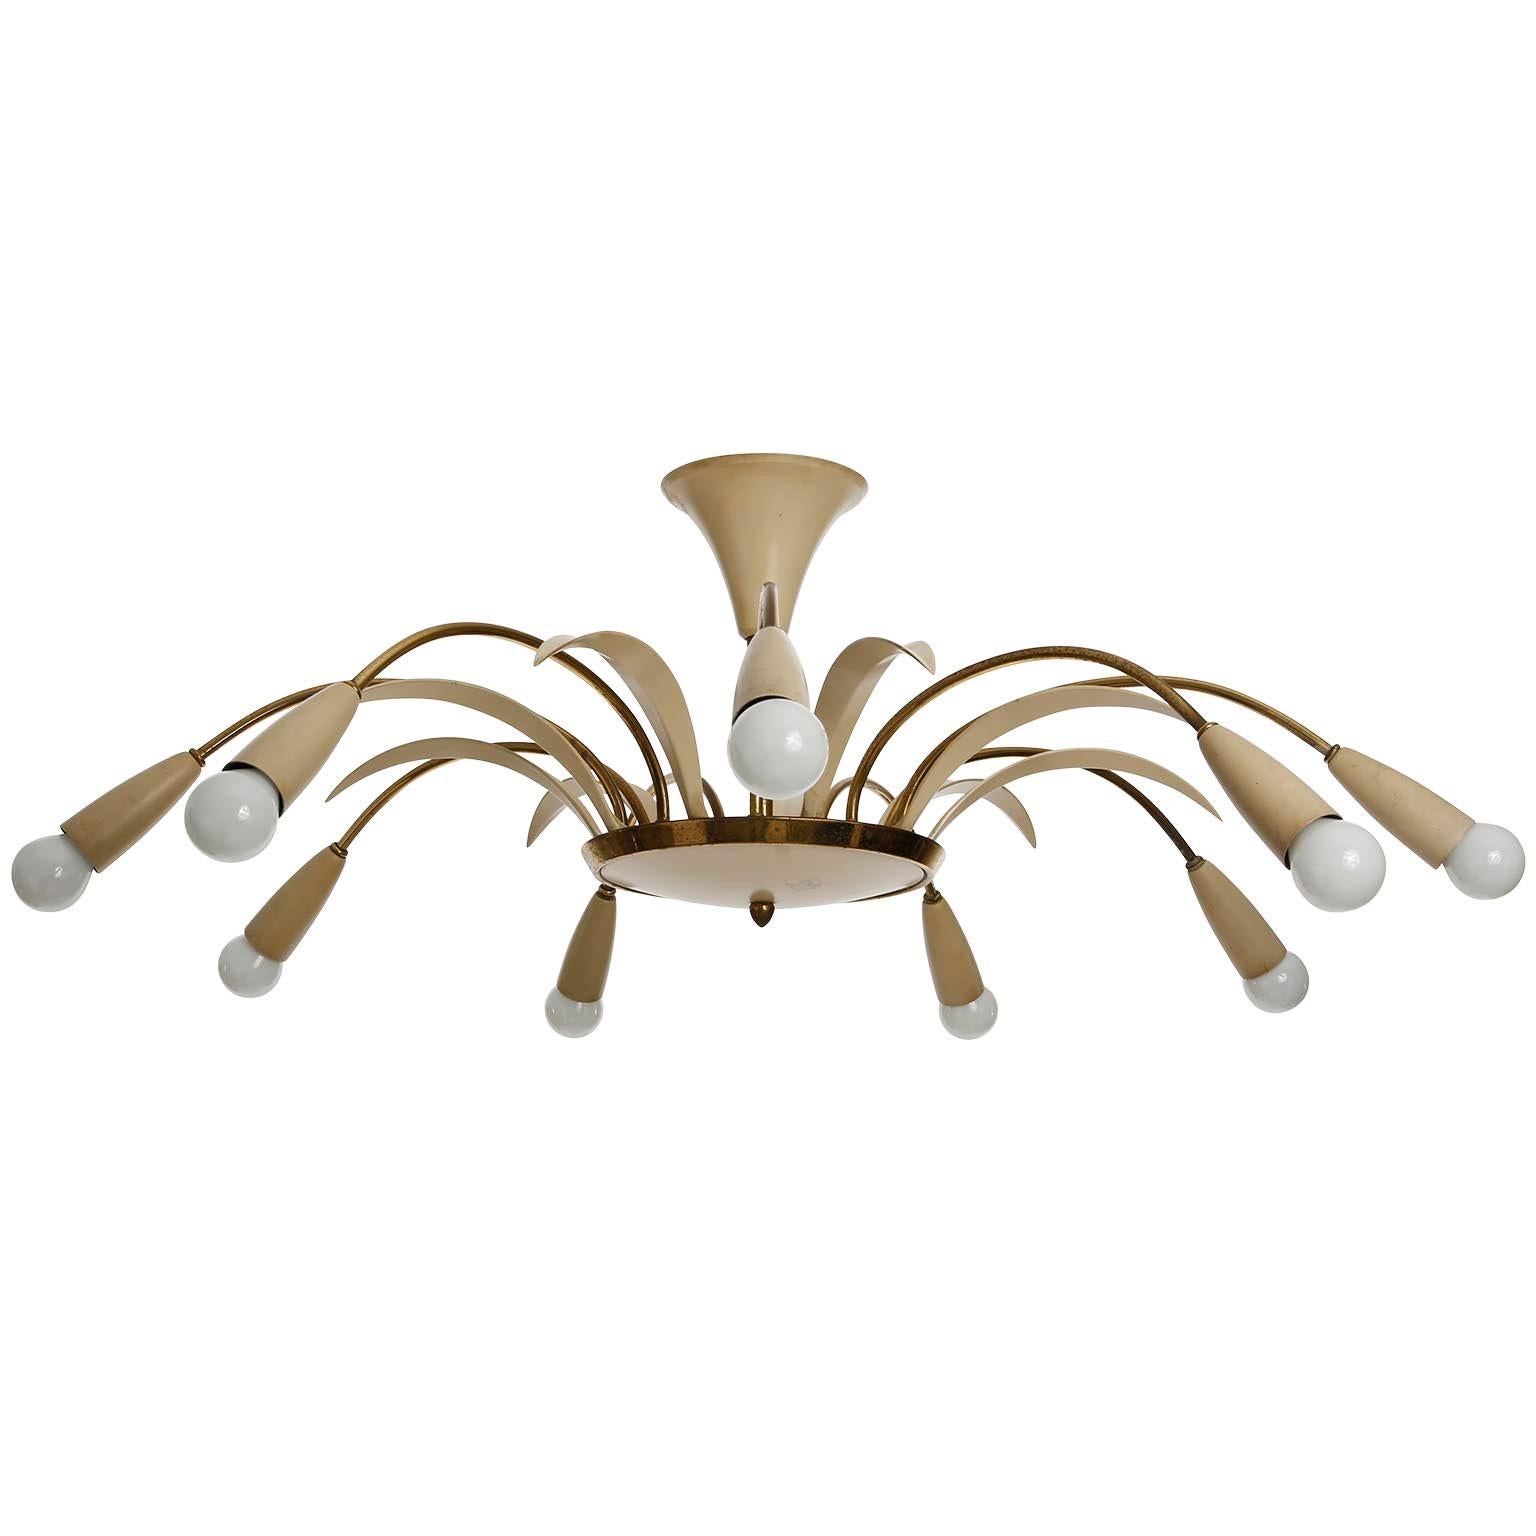 An Italian nine-arm (9-arm) flush mount light fixture or chandelier, manufactured in Mid-Century, circa 1960 (late 1950s or early 1960s).
The lamp is made of brass and creme painted details. Brass is patinated.
The fixture has nine sockets sockets